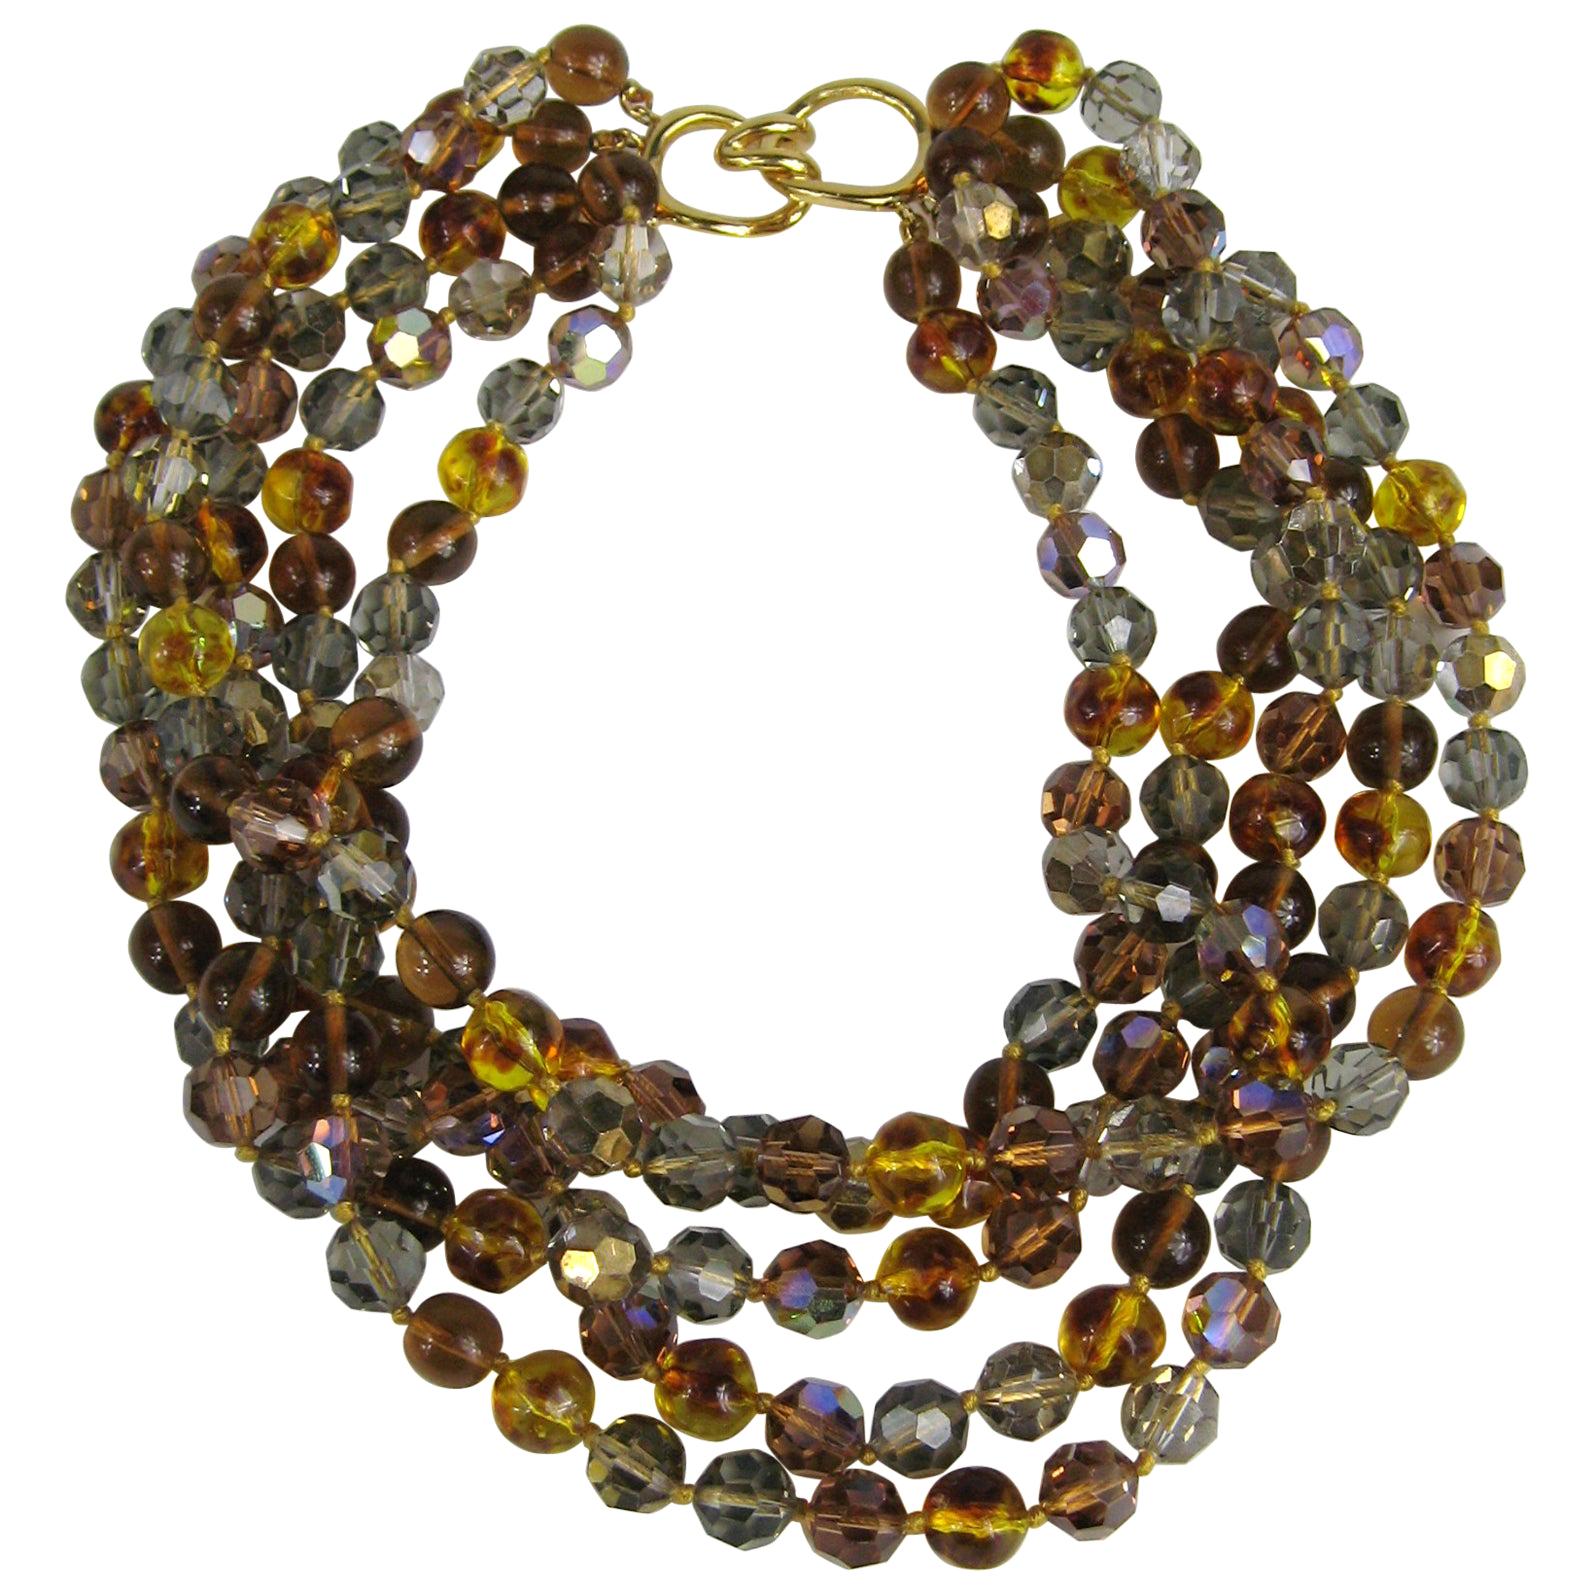  Ciner Ombre Multi strand Bead Necklace 1980s New, Never Worn